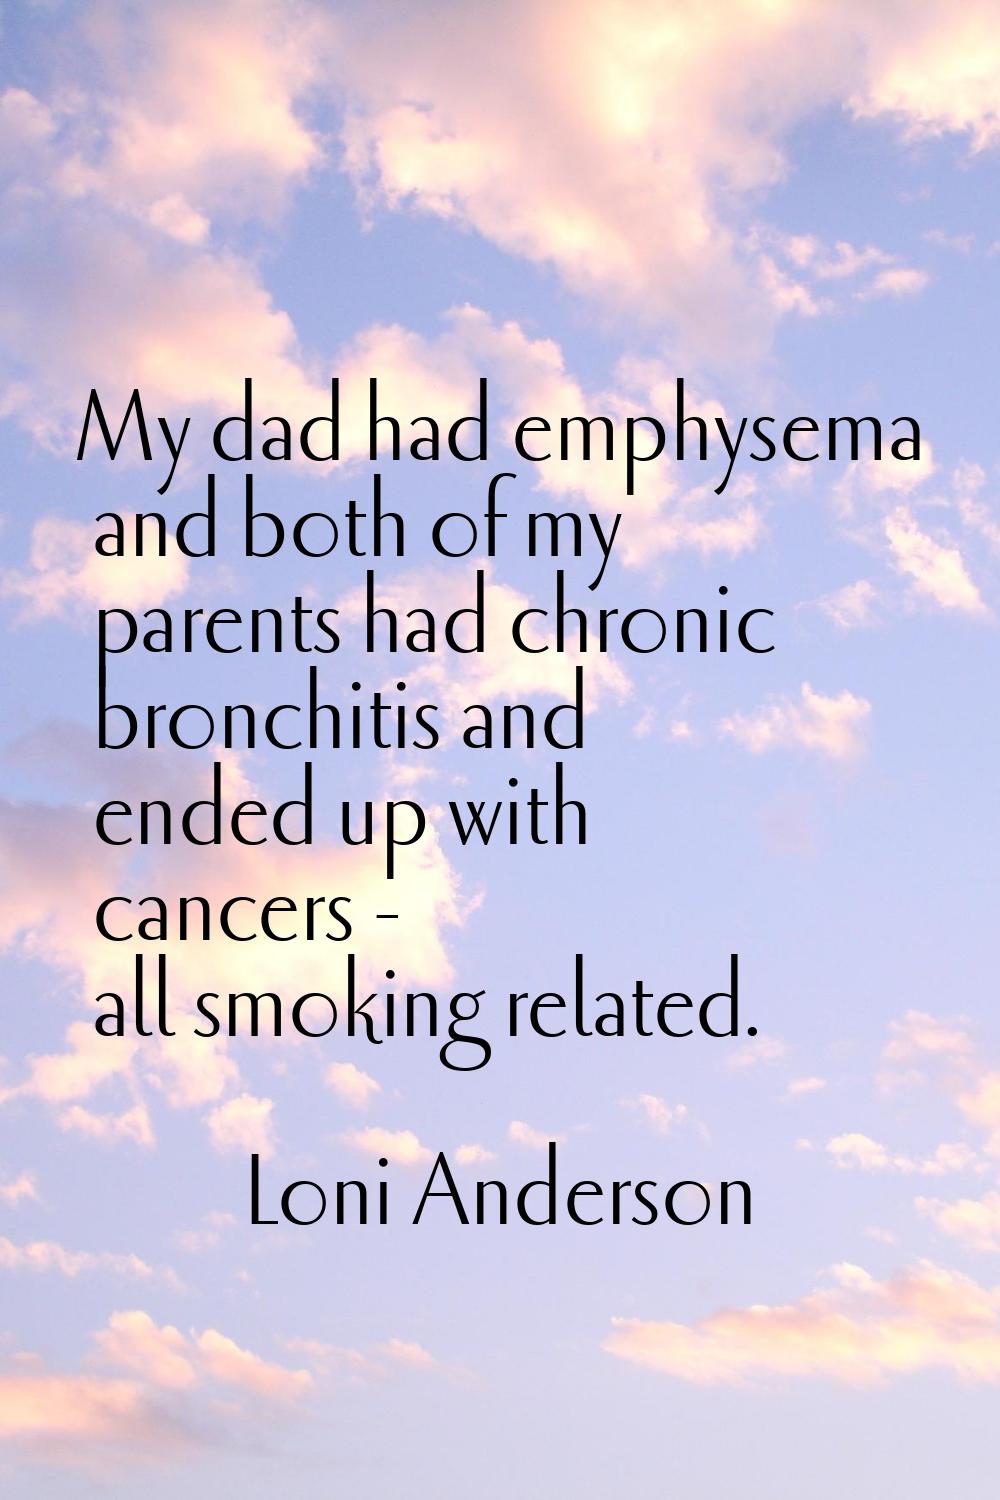 My dad had emphysema and both of my parents had chronic bronchitis and ended up with cancers - all 